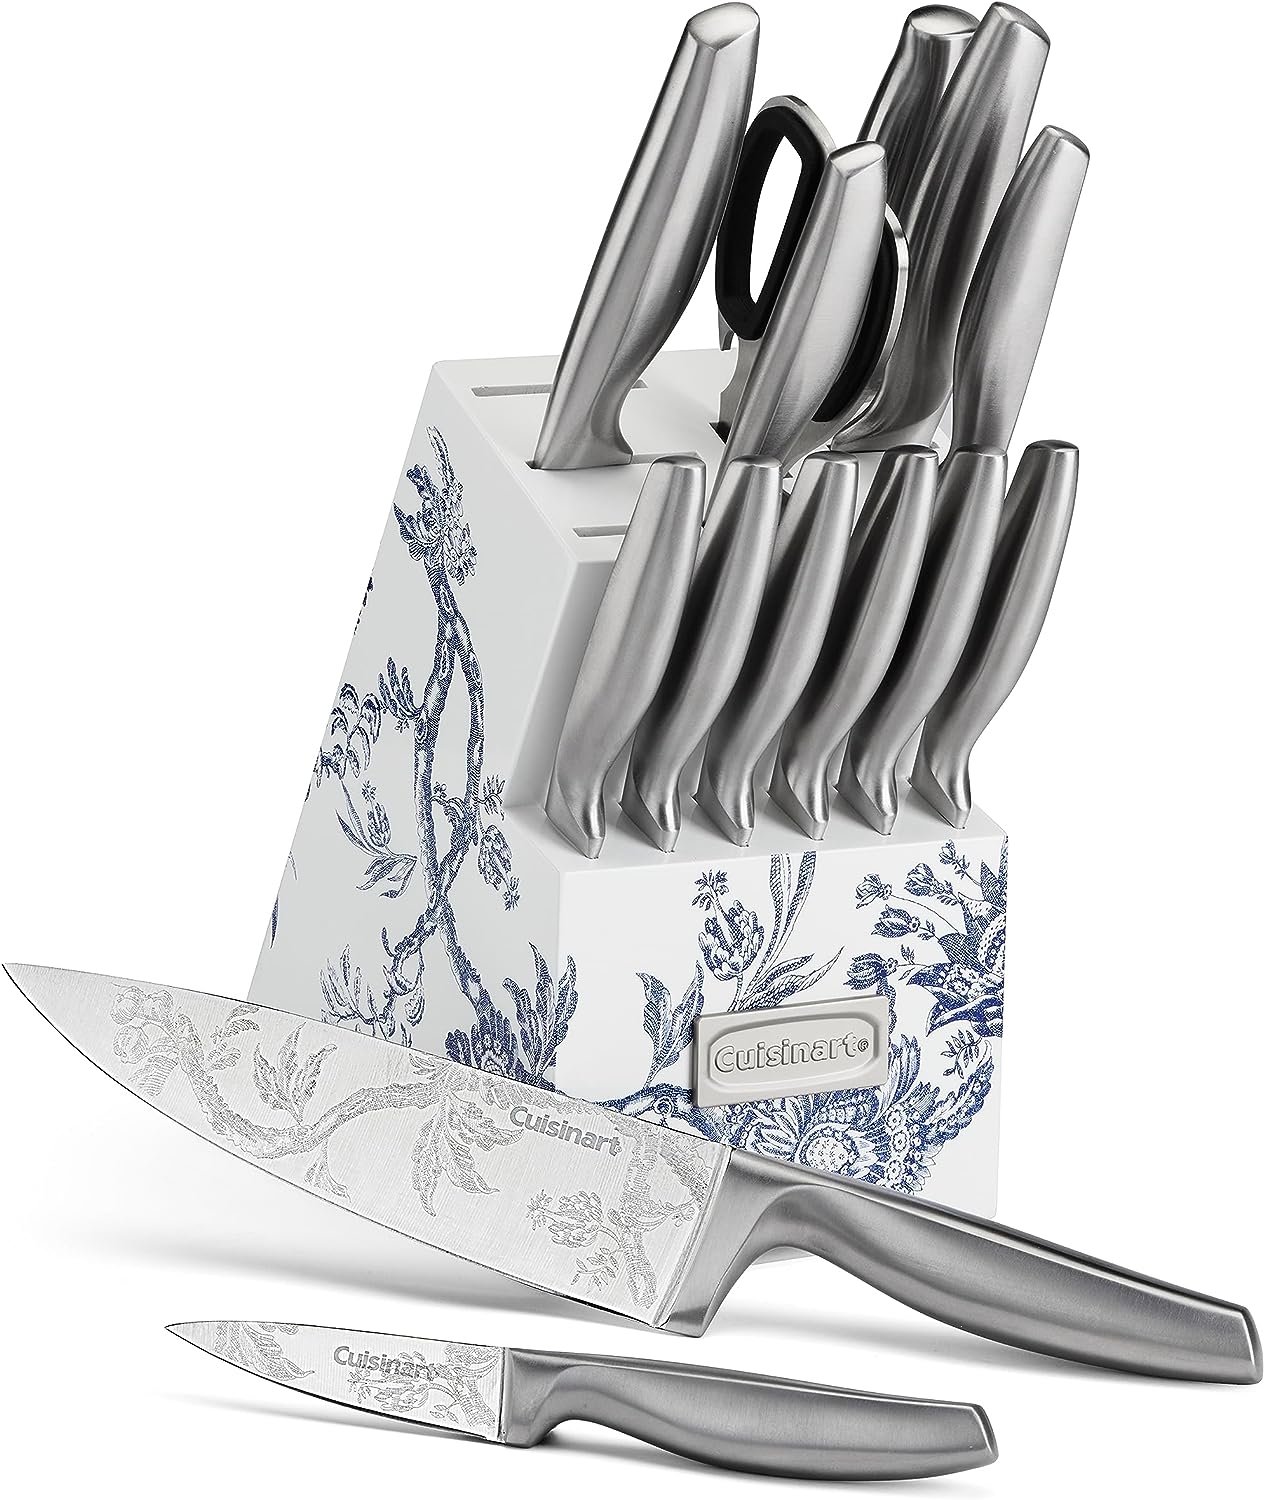 Caskata X Cuisinart Limited Edition Arcadia 15 pc. German Knife Block Set in Blue and White with Engraved Blades